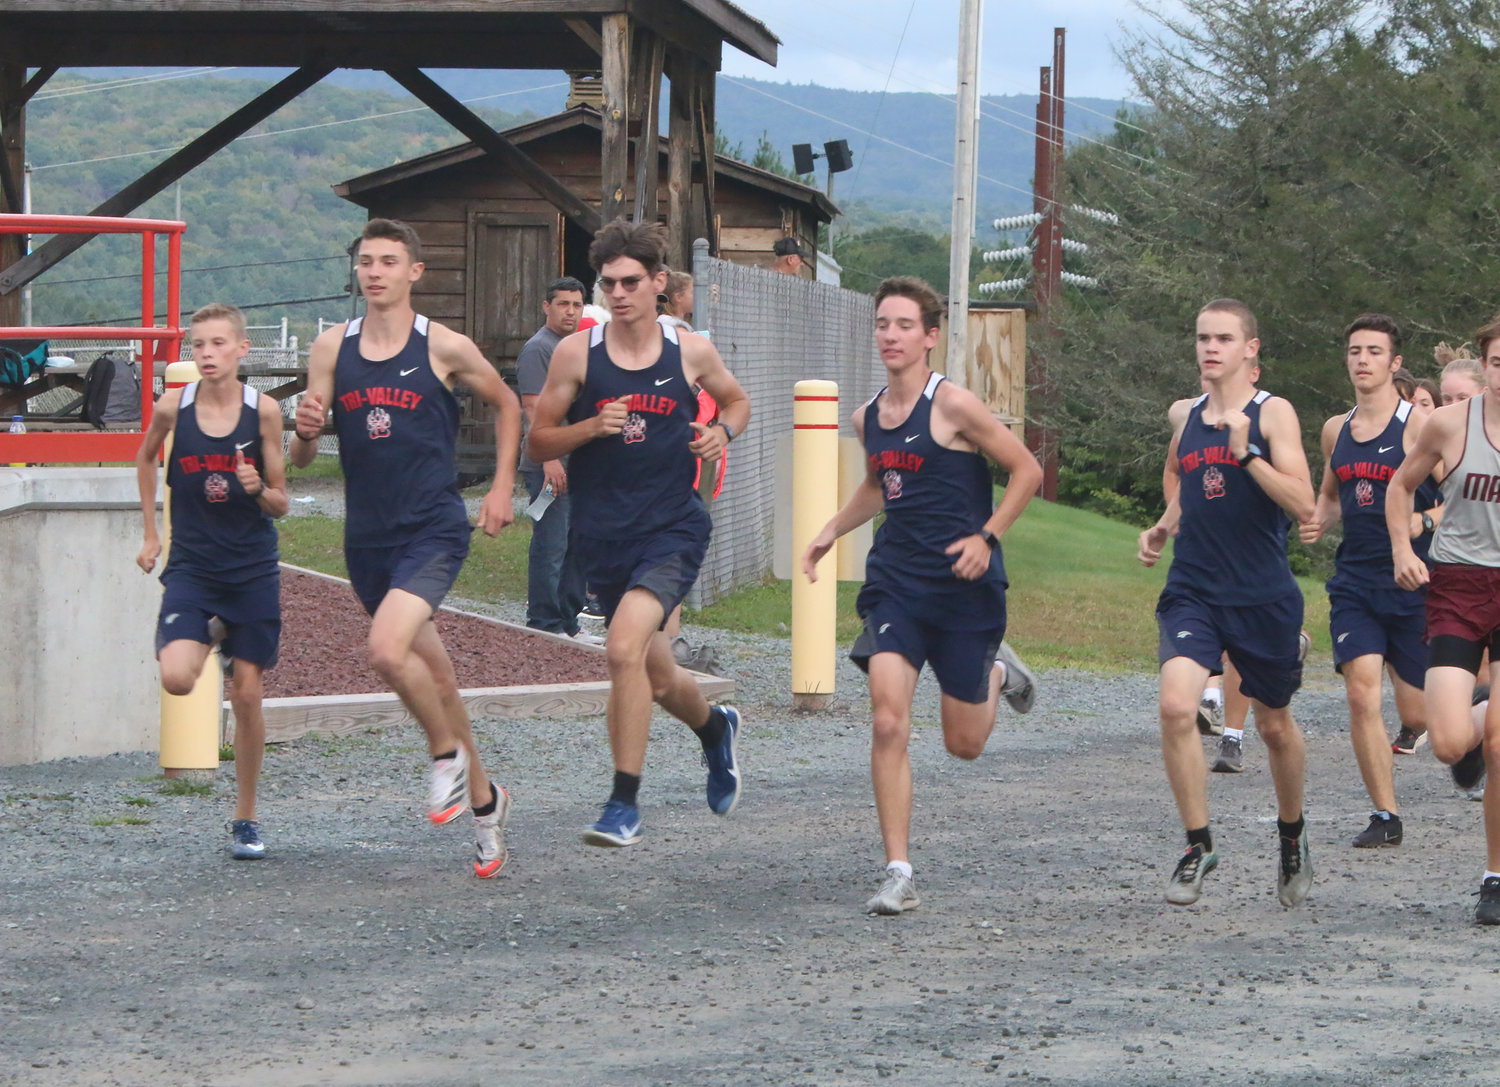 The Tri-Valley Bears cross country team finished first as a team in the Burnt Hills Cross Country Invitational.